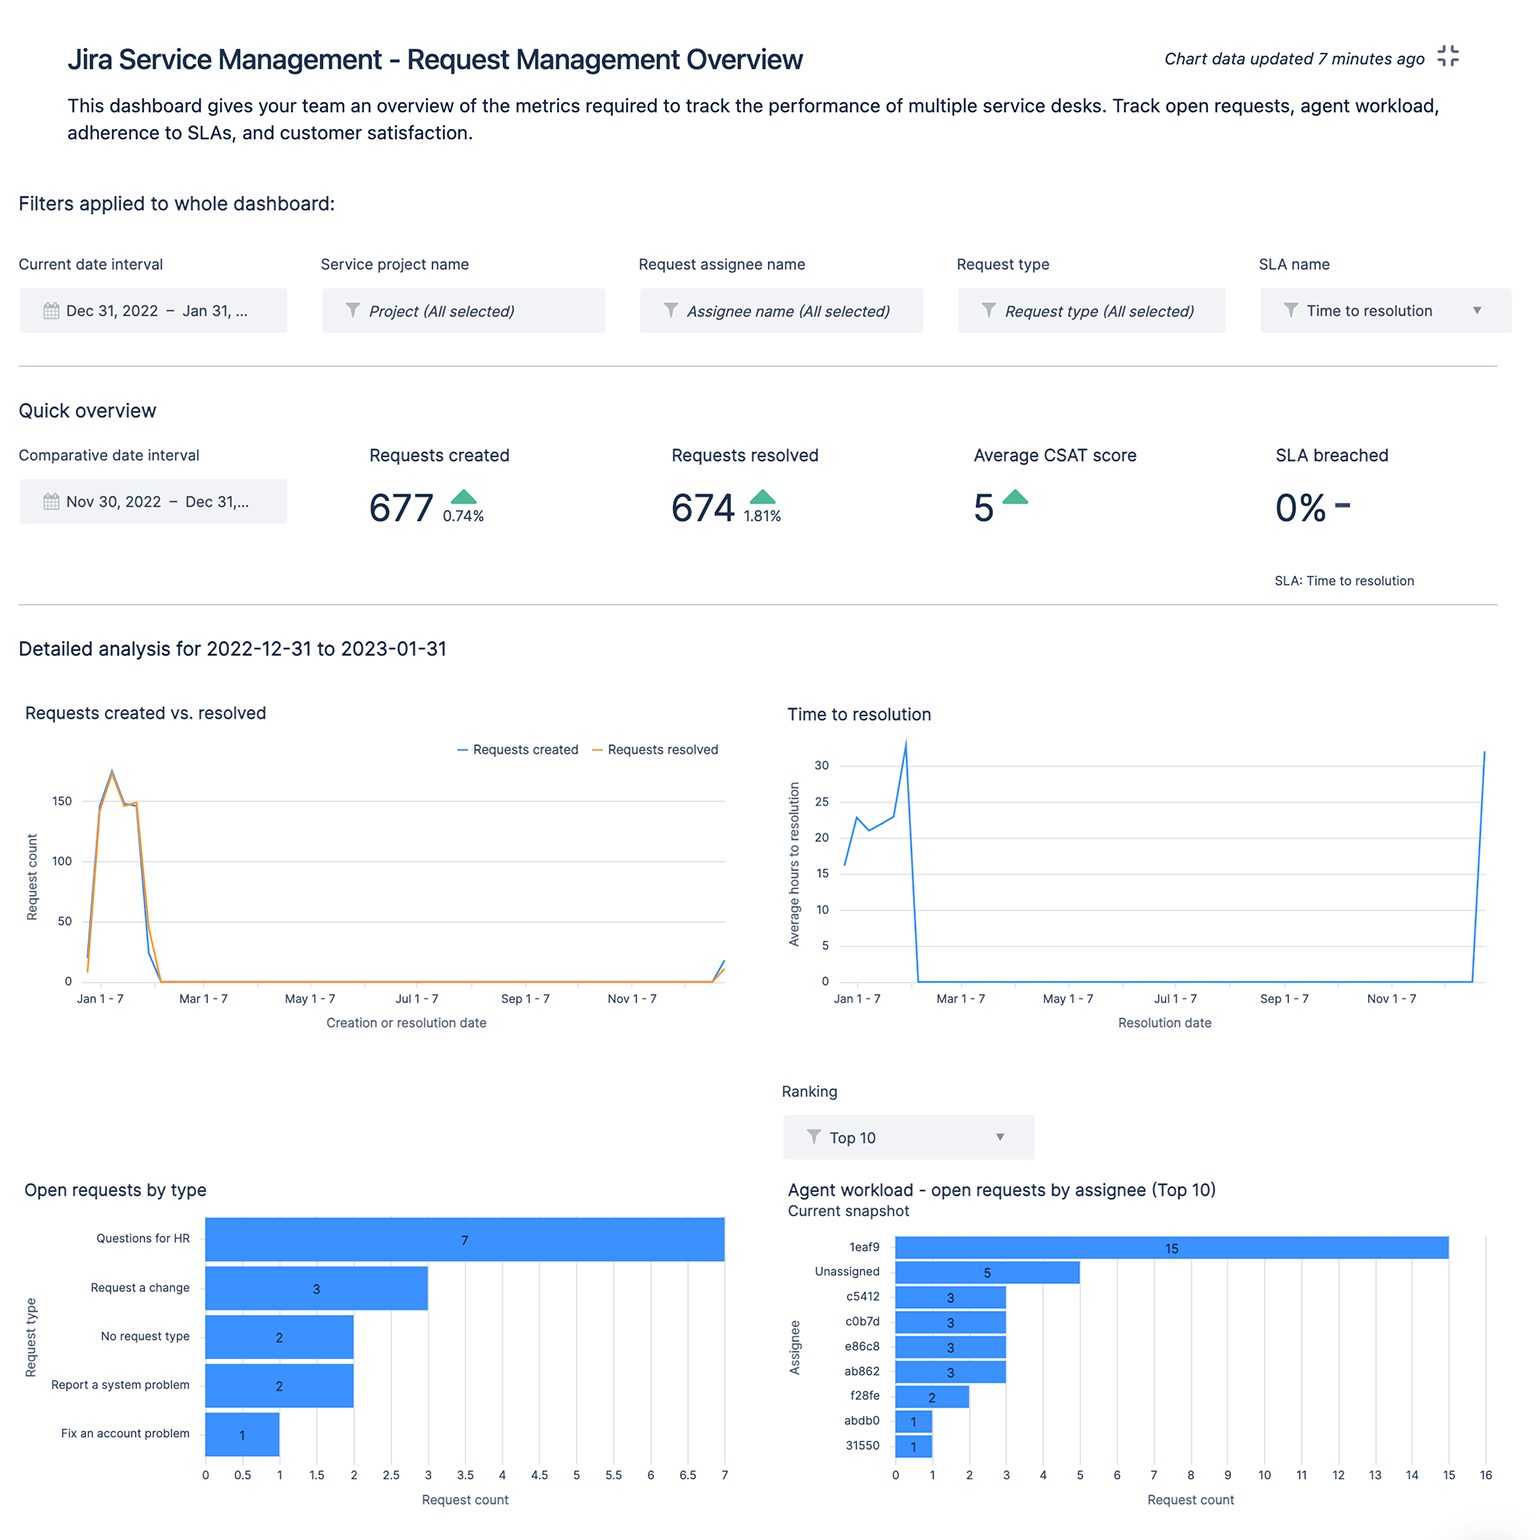 A request management dashboard in Atlassian Analytics shows charts used by IT service management teams to track requests created vs. resolved, time to resolution, open requests by type, and IT agent workload.